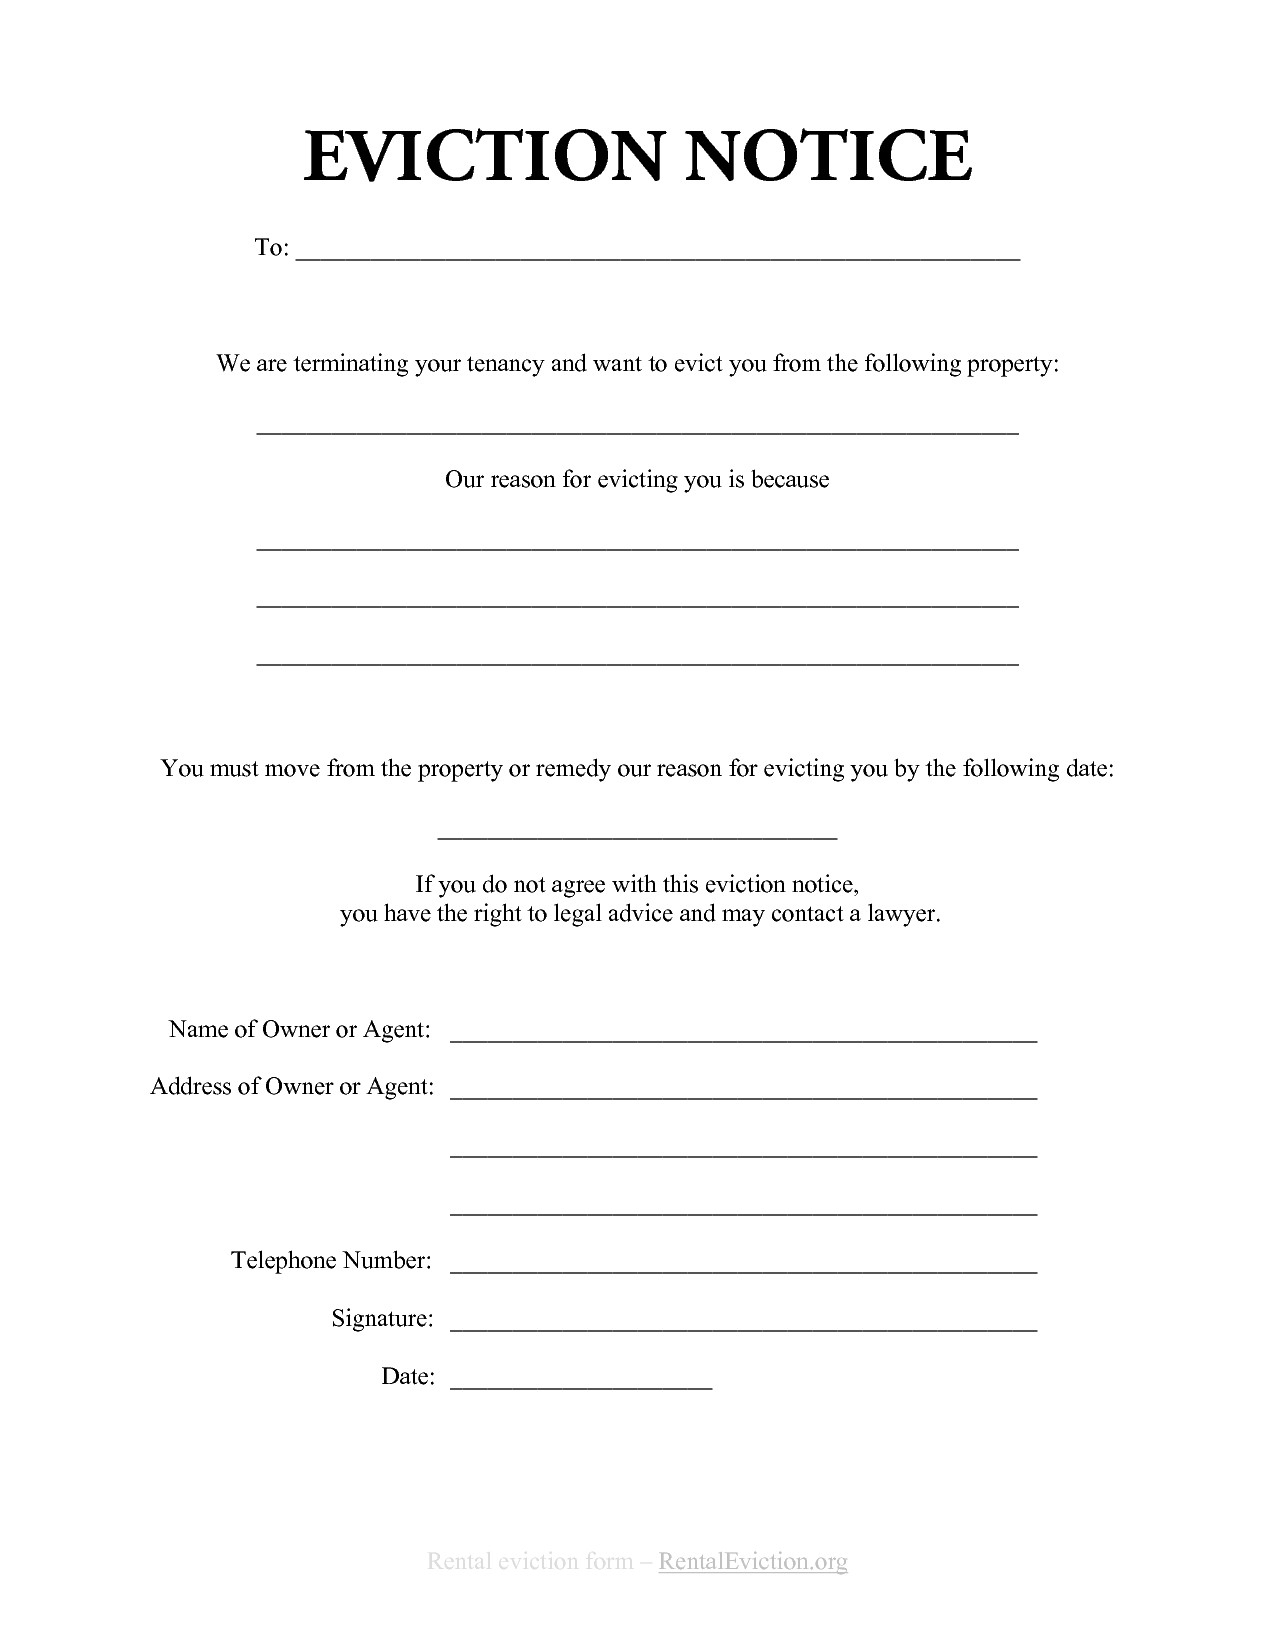 Eviction Notice Template | Charlotte Clergy Coalition - Free Printable Blank Eviction Notice